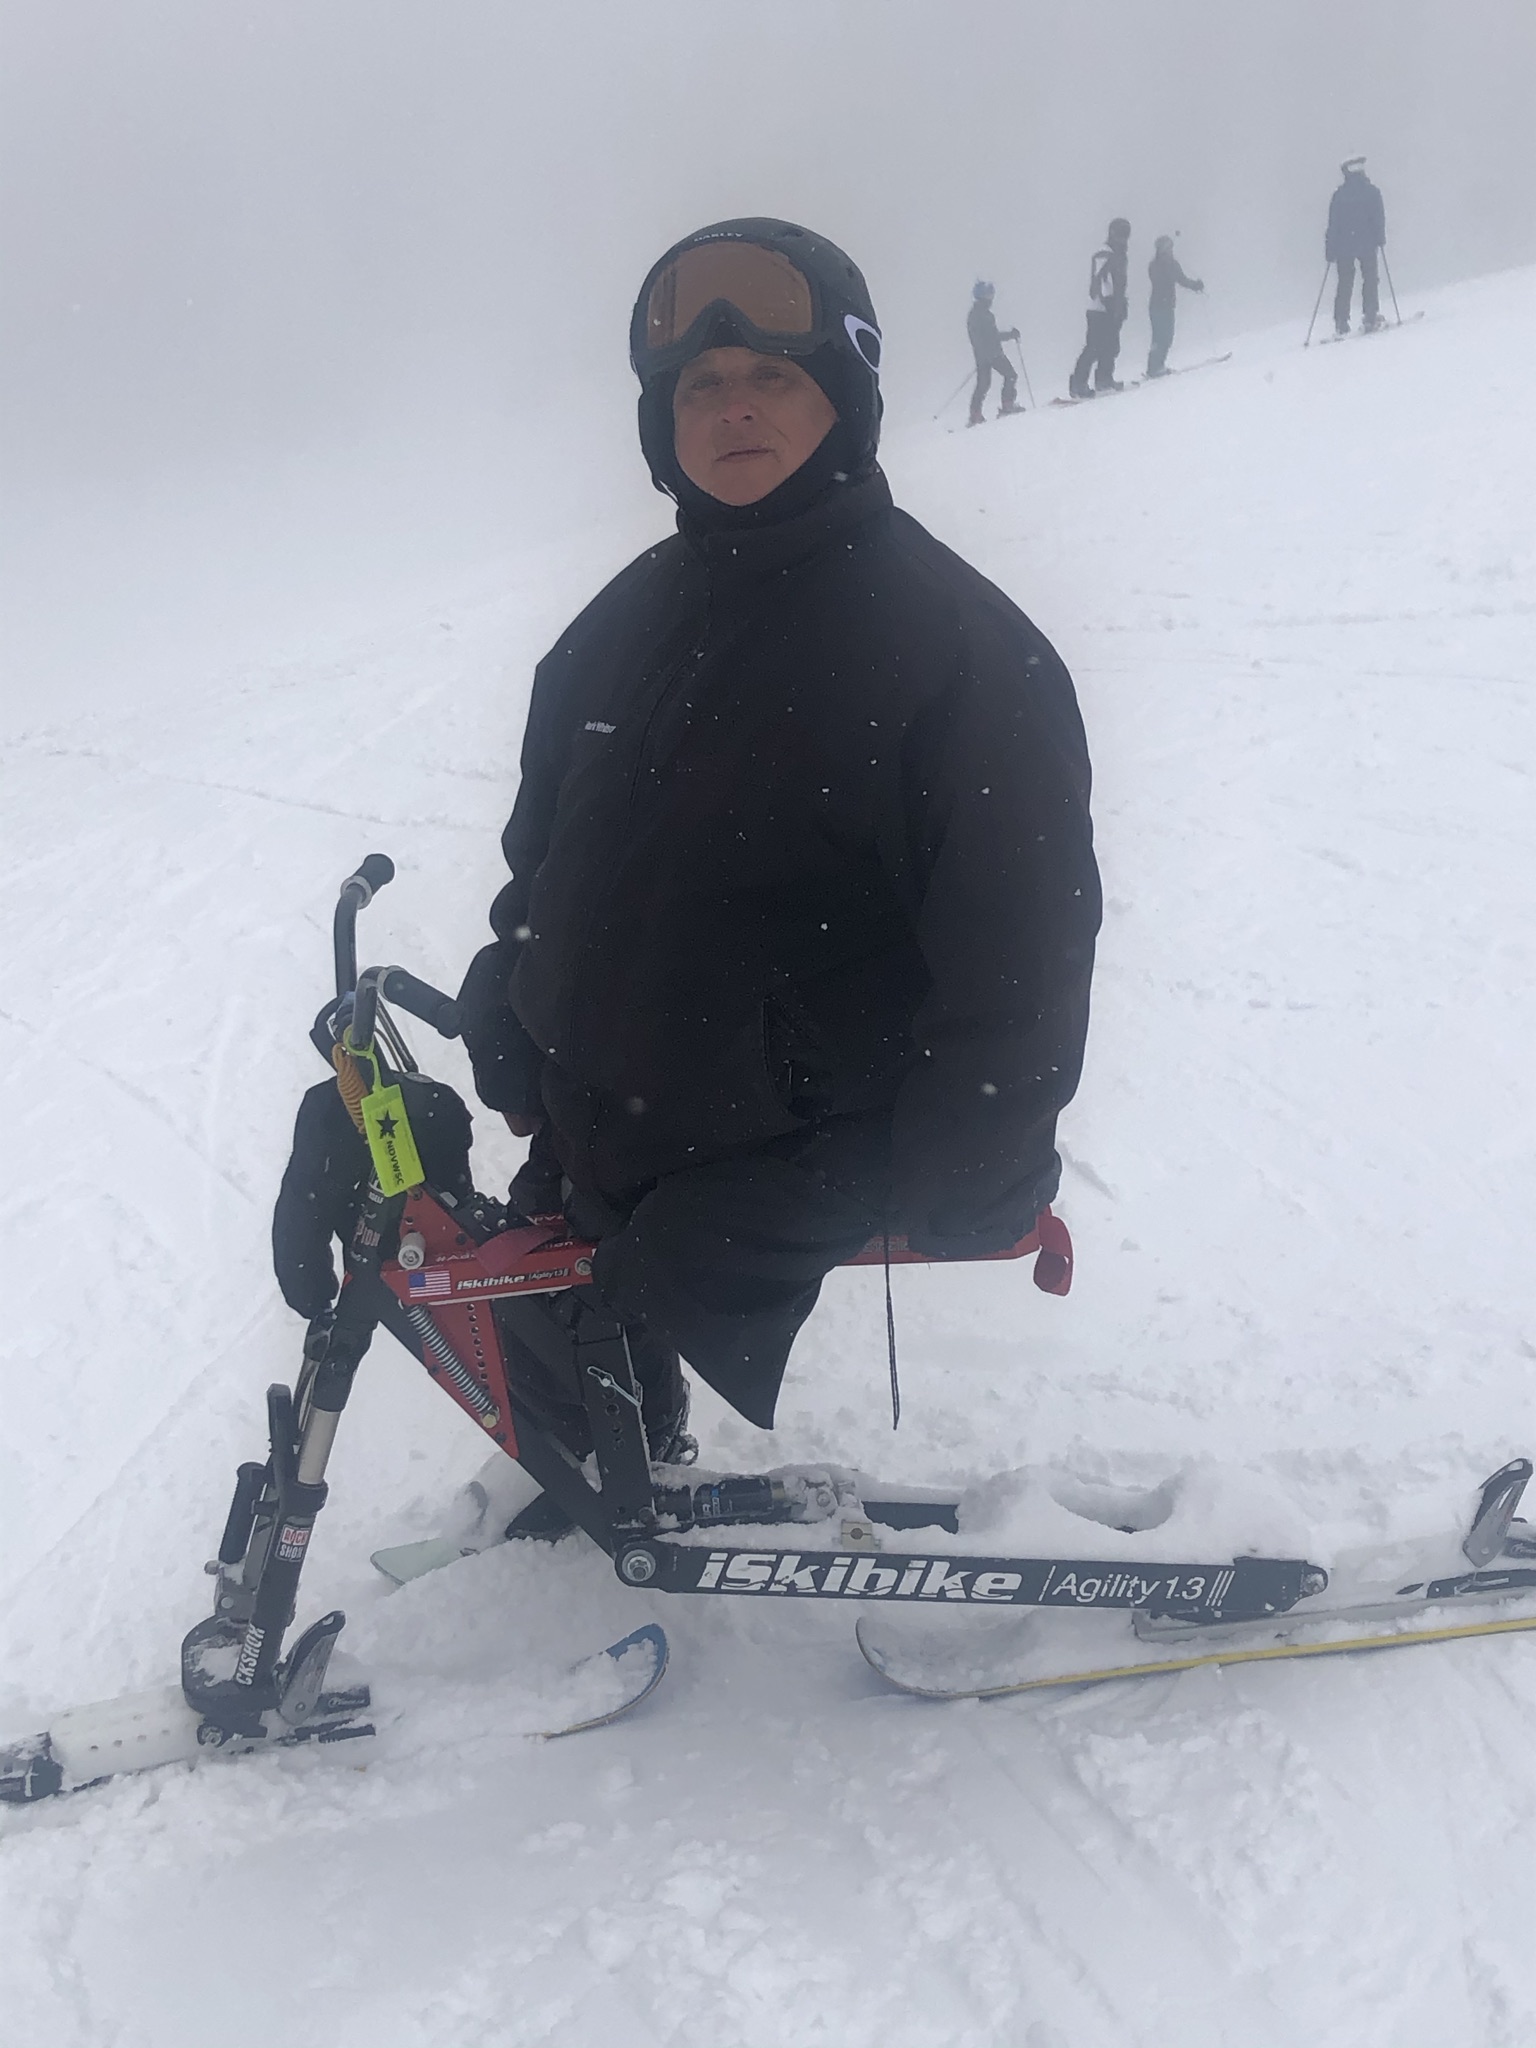 Athlete posed looking at the camera on a ski bike